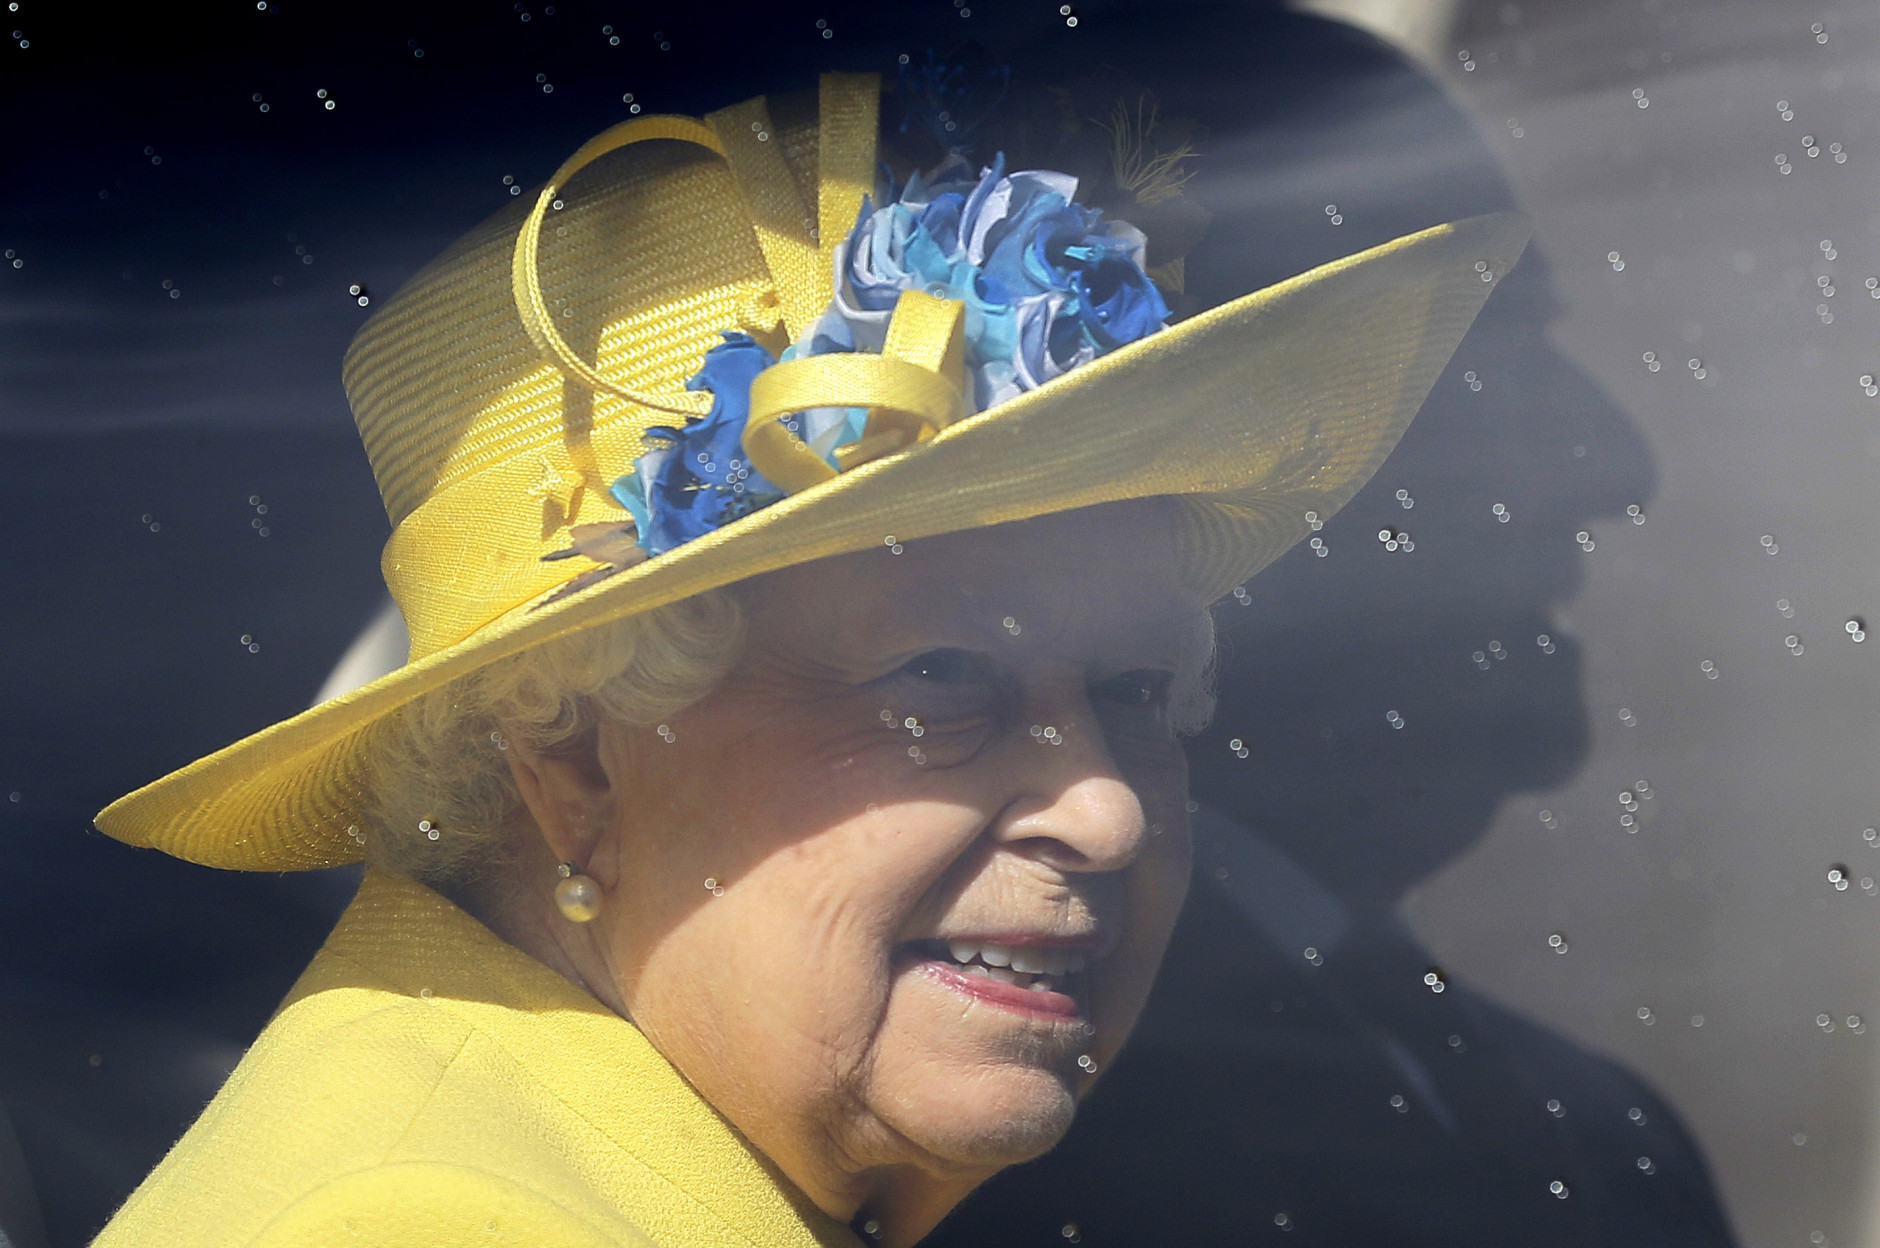 WINDSOR, ENGLAND - MARCH 27:  Queen Elizabeth II leaves in a car after attending the Easter Mattins service at St George's Chapel, Windsor Castle on March 27, 2016 in Windsor, England. (Photo by Kirsty Wigglesworth - WPA Pool/Getty Images)